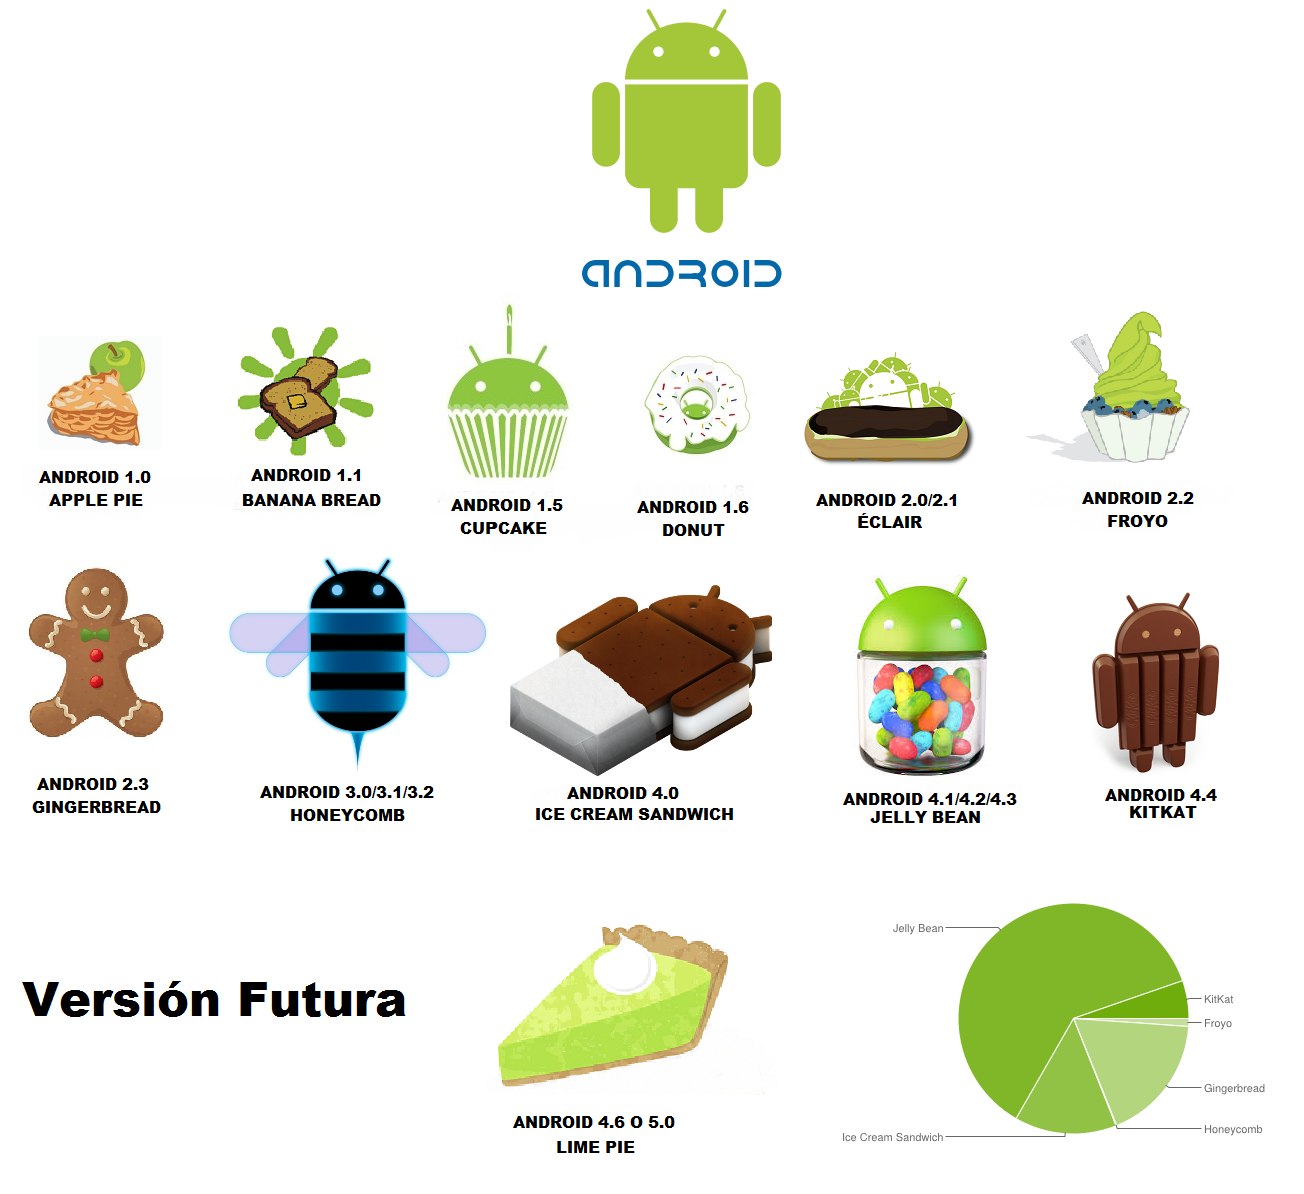 1000+ images about Android on Pinterest | Smartphones, Mobiles and